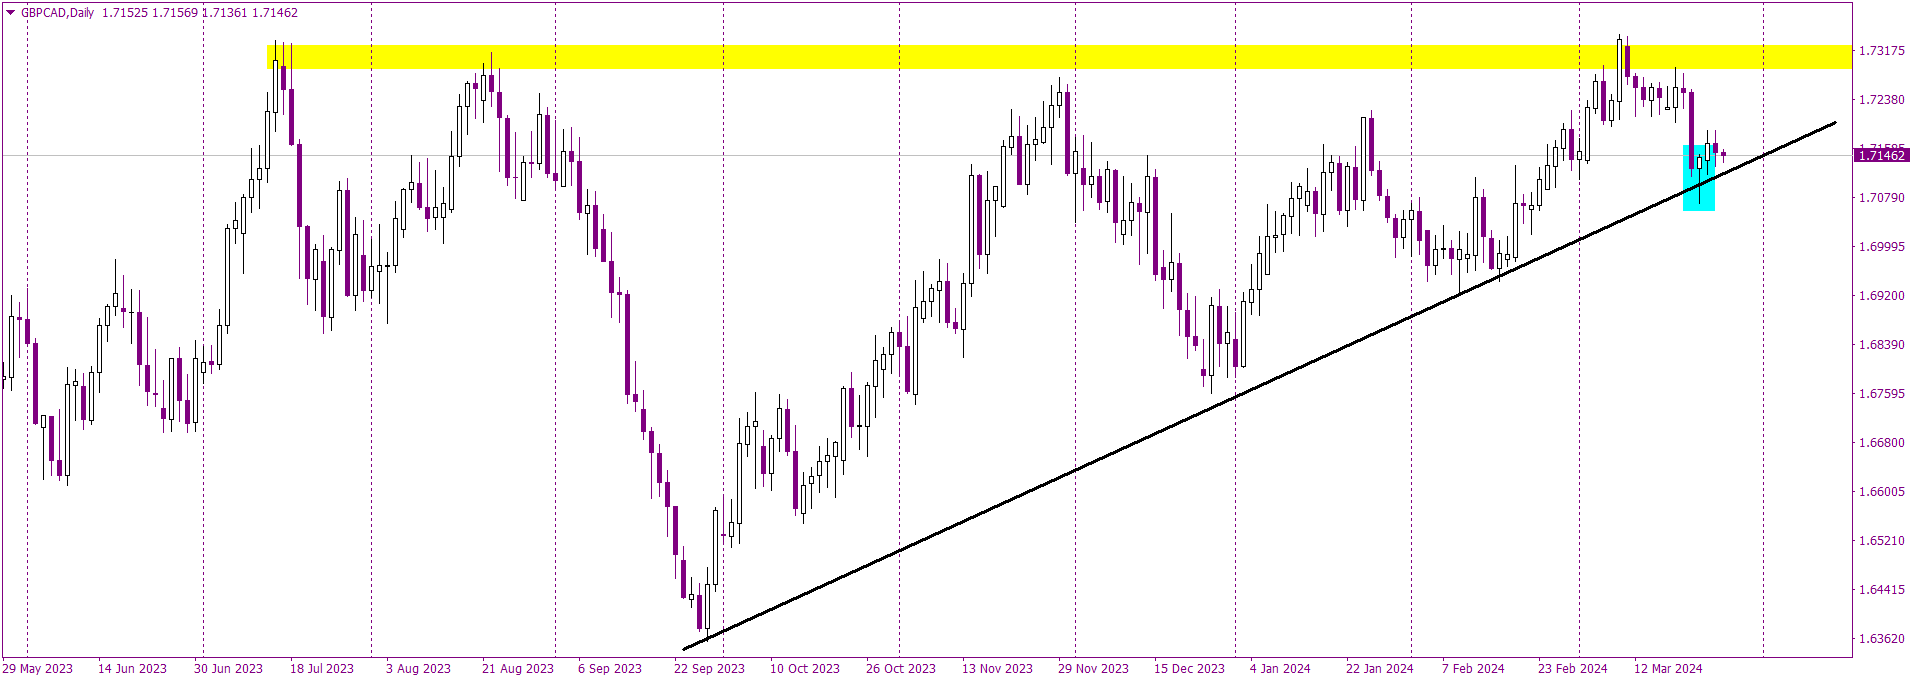 Pressure Mounts on GBP/CAD’s Long-Term Support